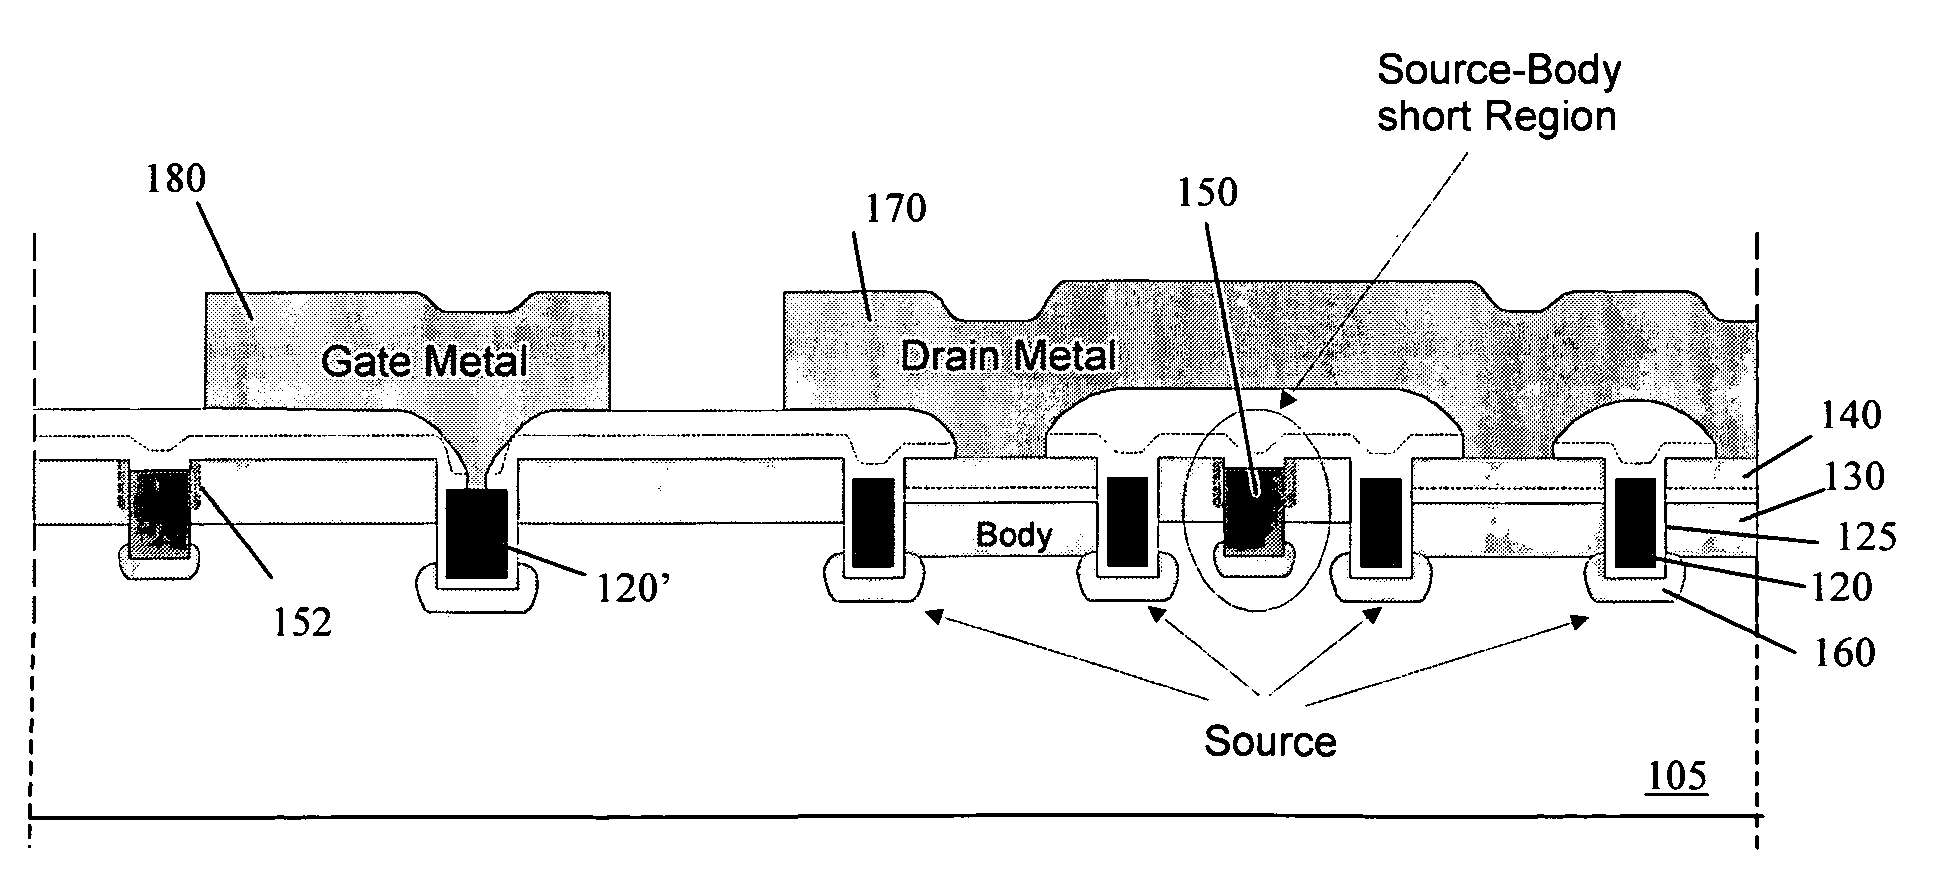 Inverted-trench grounded-source FET structure with trenched source body short electrode